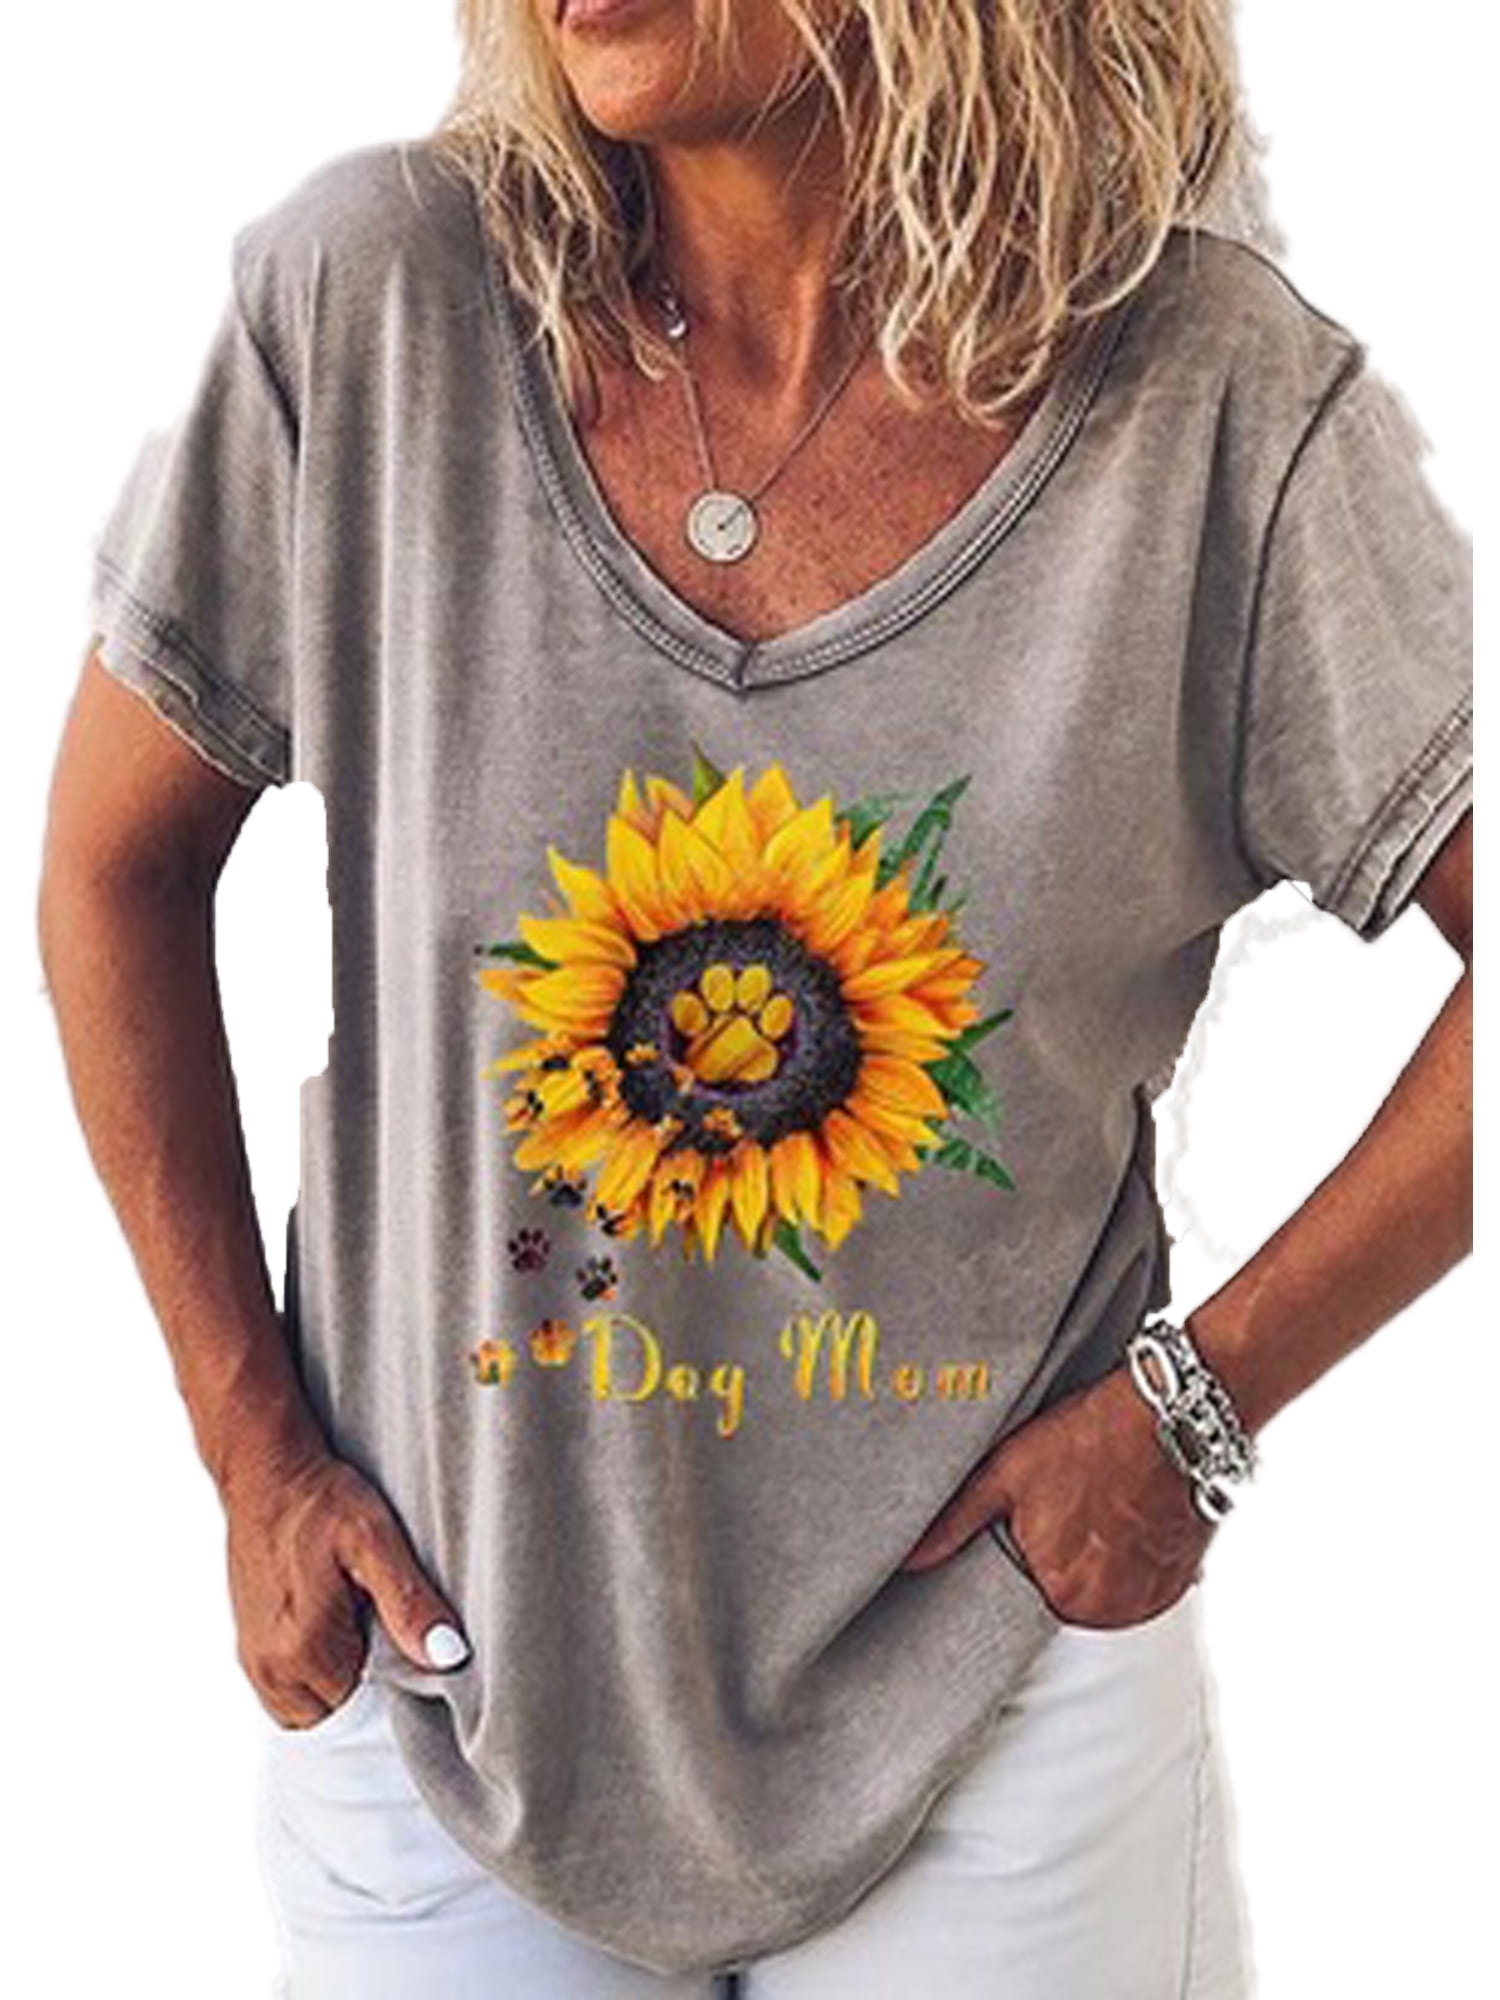 AODONG Womens Summer Tops Loose Fit Short Sleeve Sunflower Tee Shirts Plus Size Casual Women Tops 